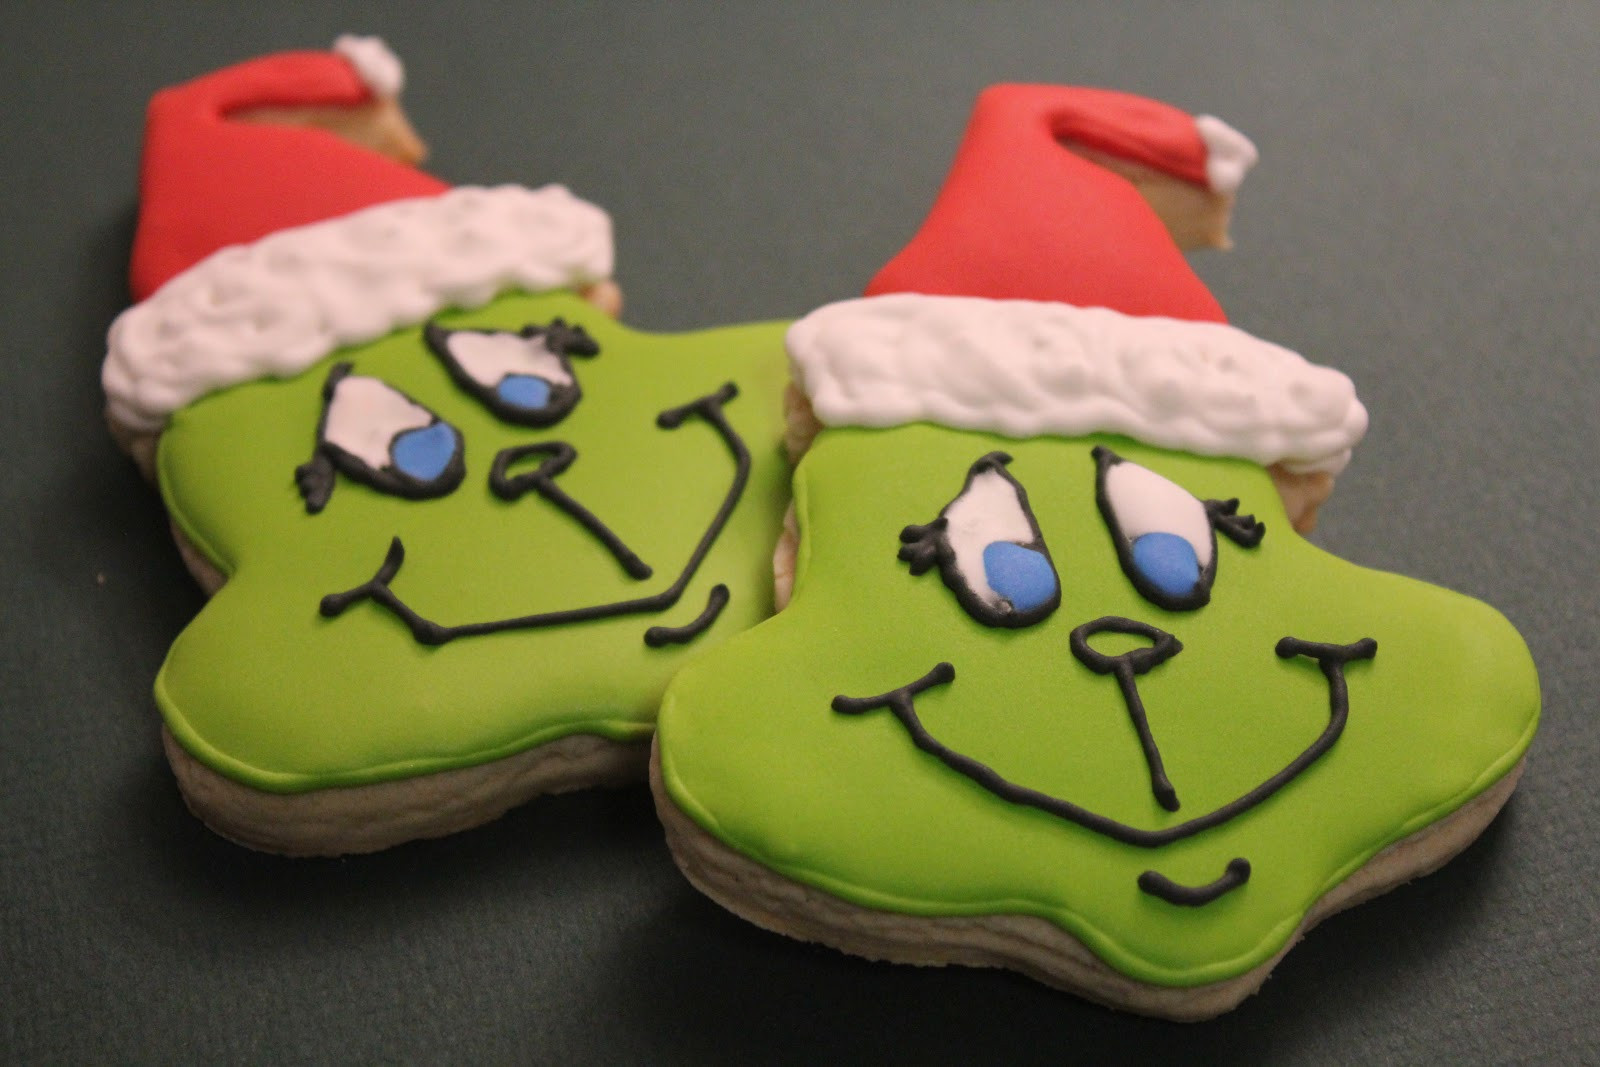 Cookie Cutter Sugar Cookies
 Crafty Cookies A Grinch Cookie Cutter and Cookies